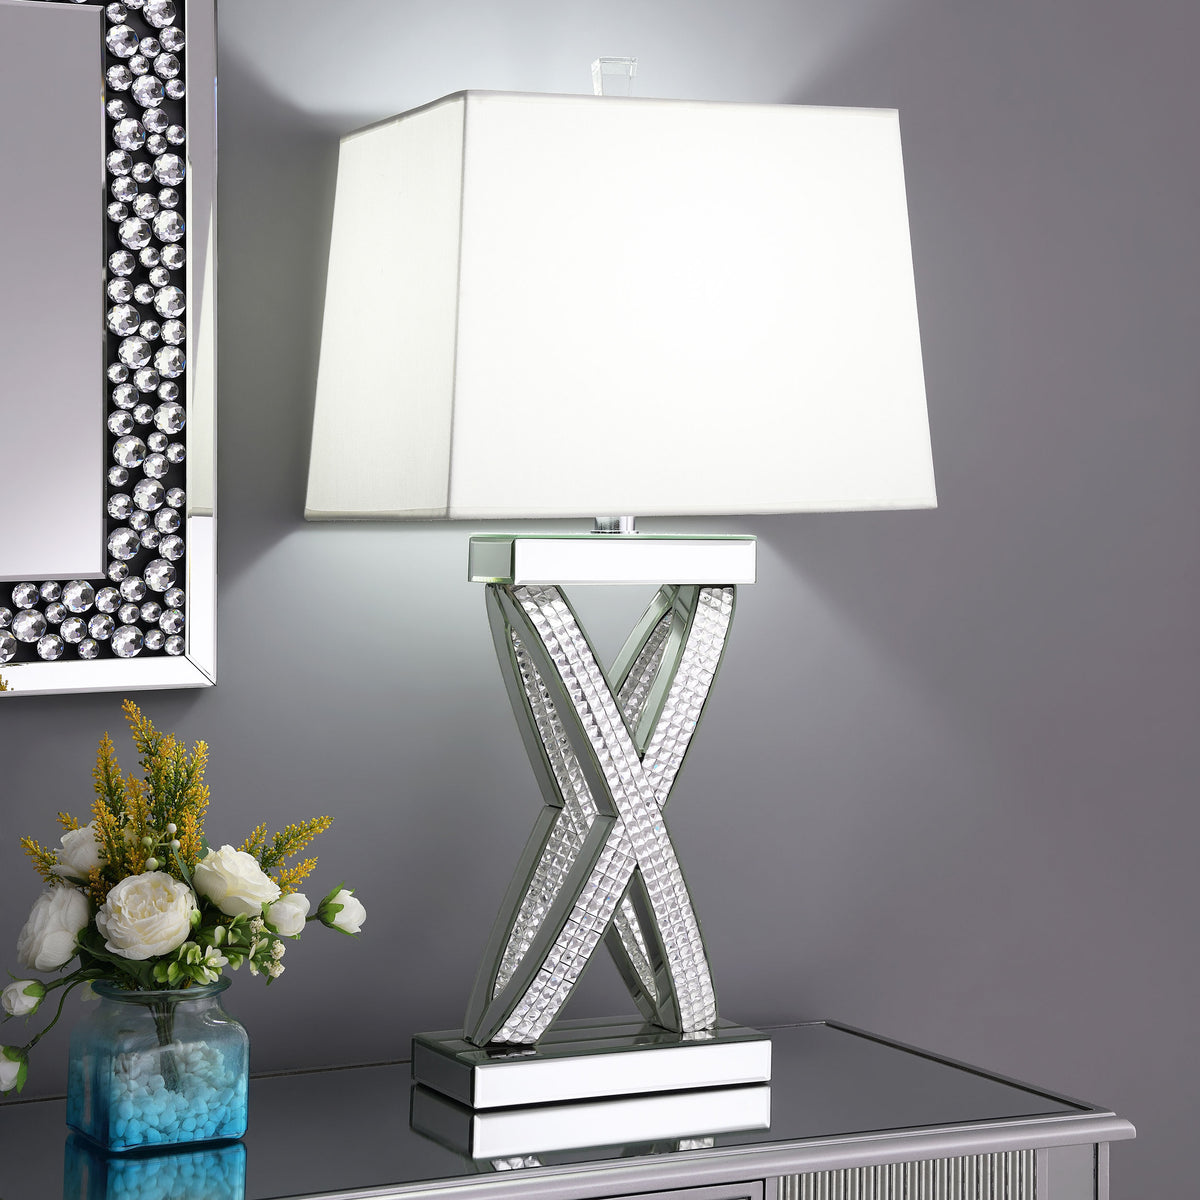 Dominick Table Lamp with Rectange Shade White and Mirror Dominick Table Lamp with Rectange Shade White and Mirror Half Price Furniture